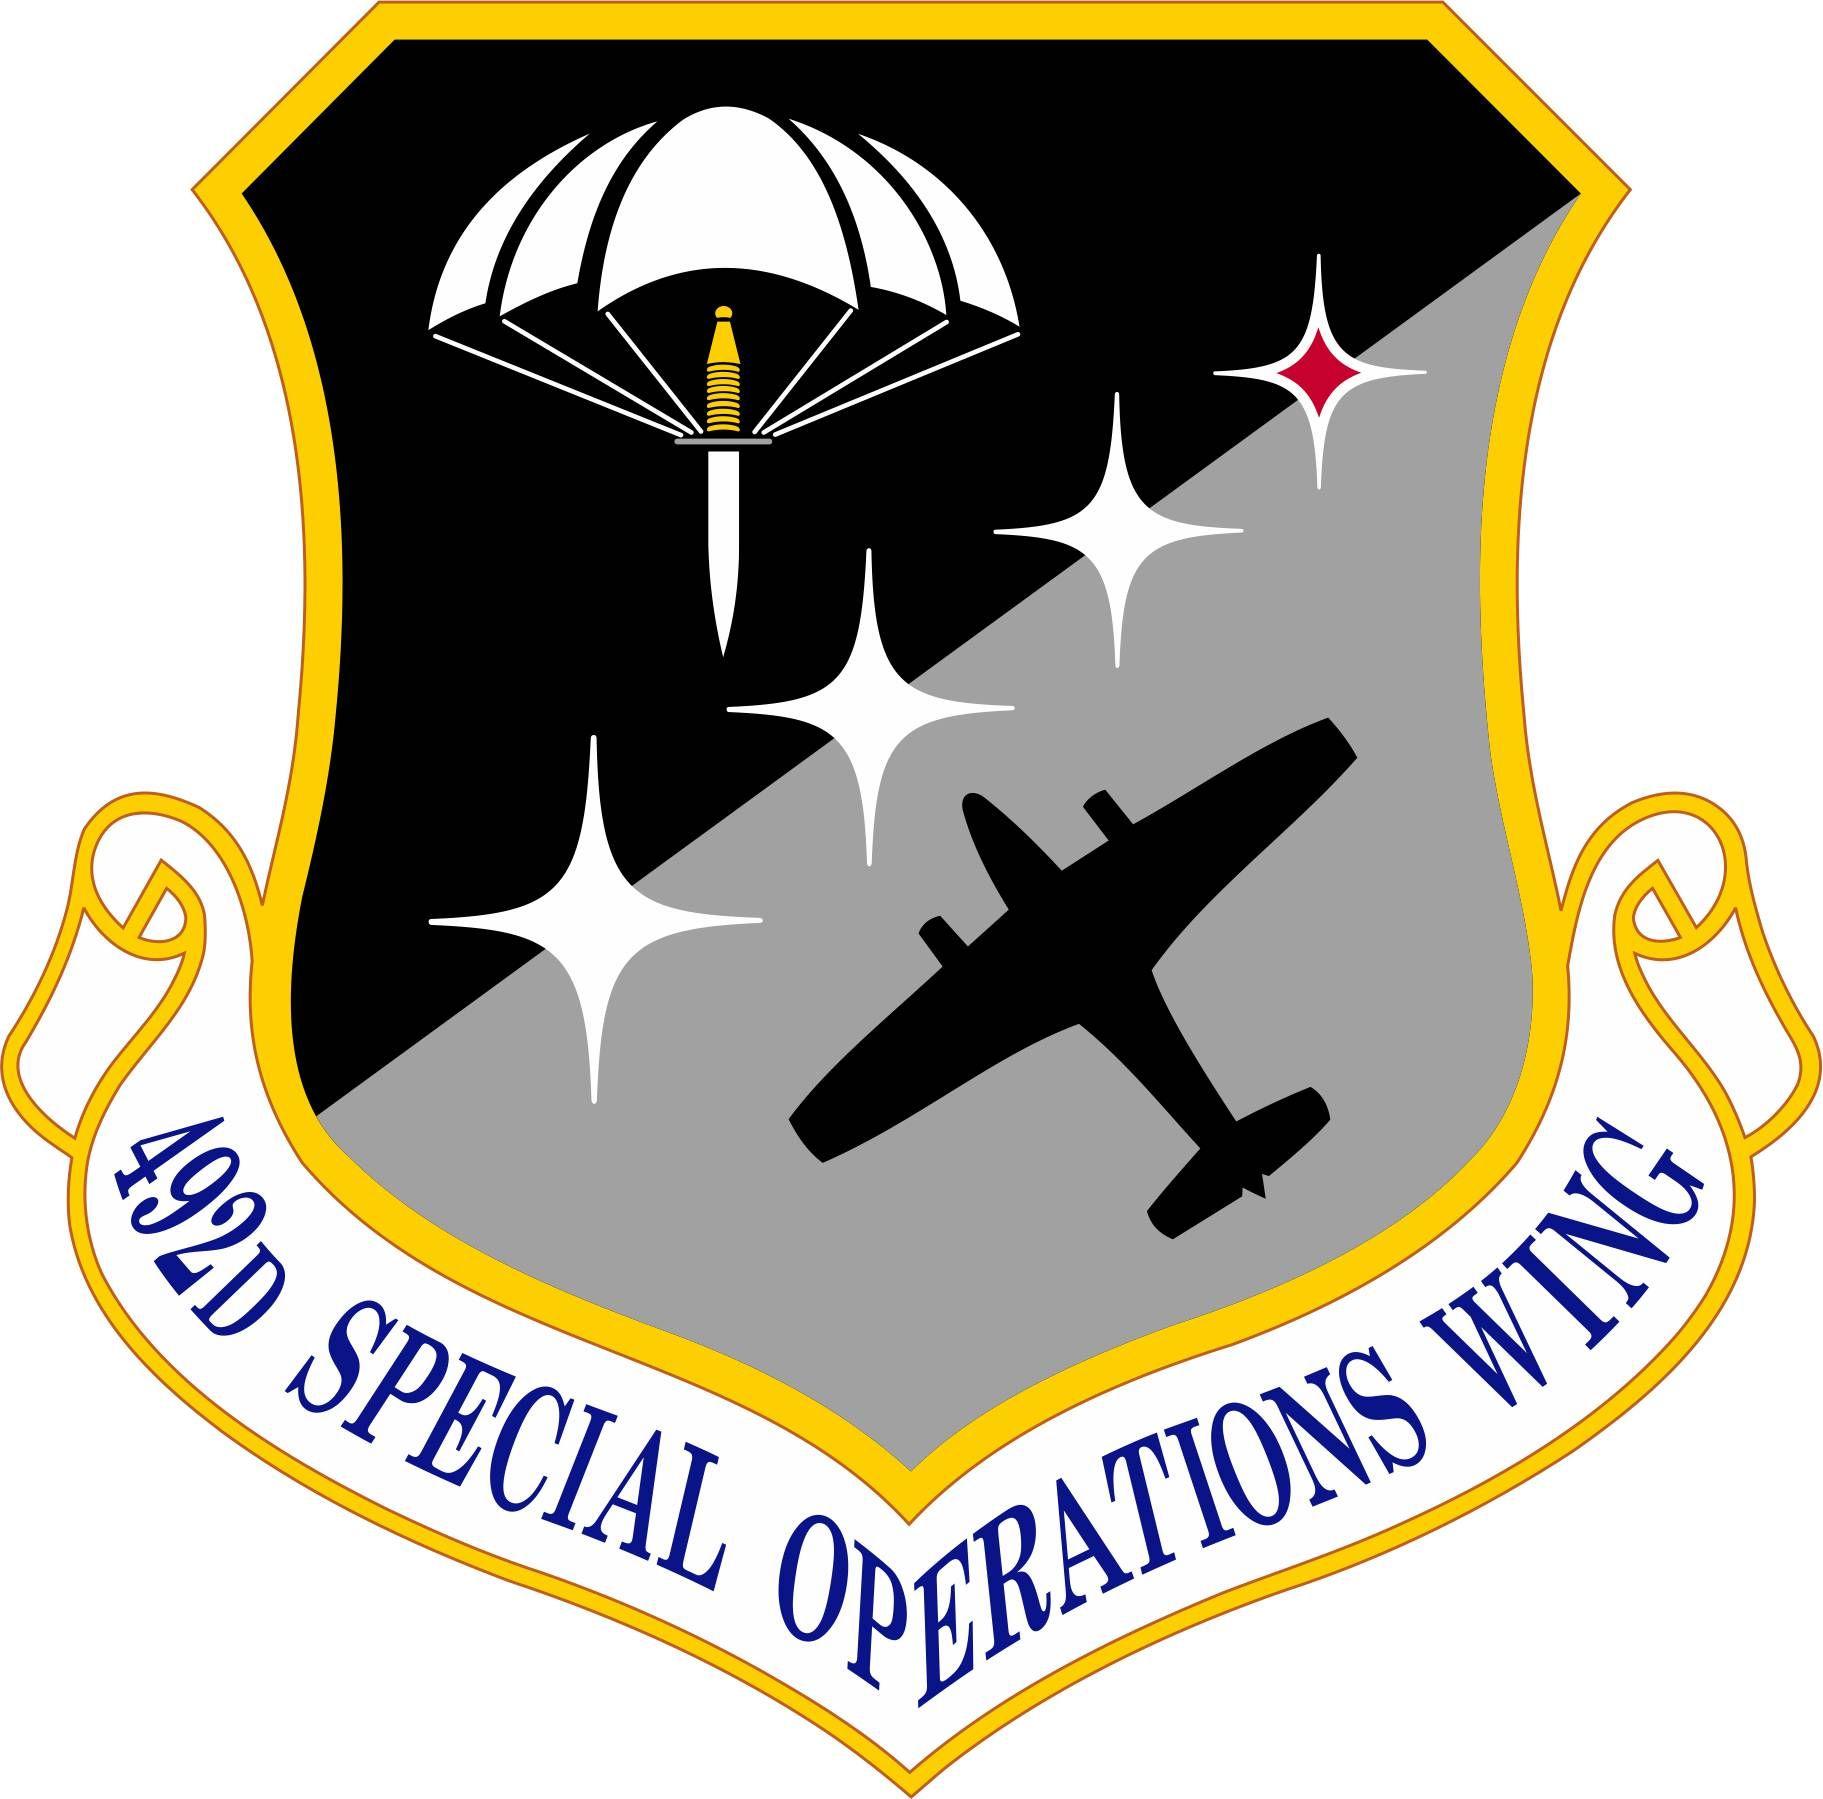 AFSOC Logo - 492nd Special Operations Wing > Air Force Special Operations Command